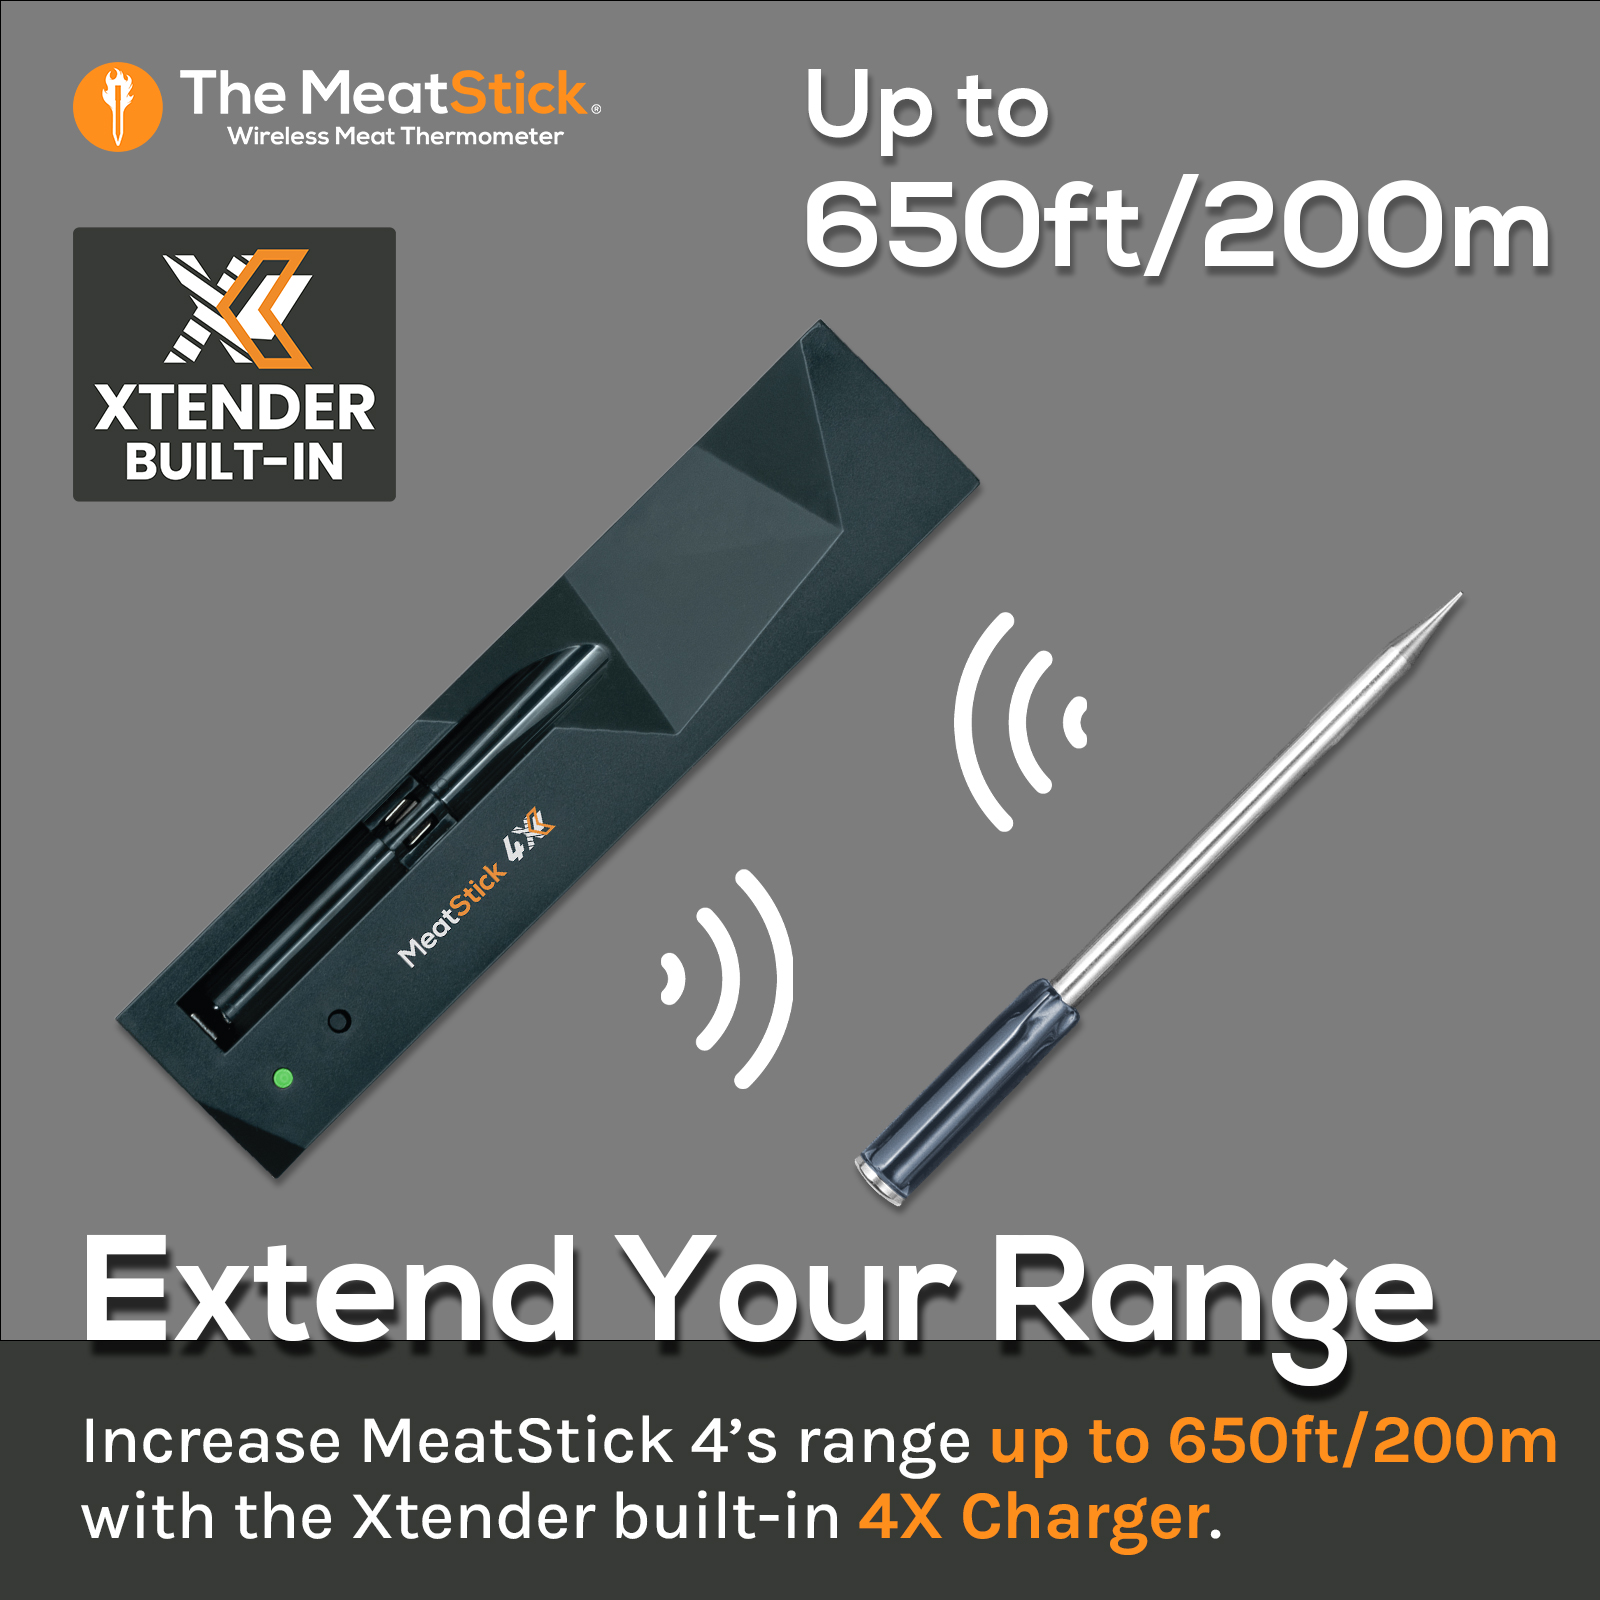 The Xtender™ technology allows the MeatStick 4X transmits its Bluetooth signal up to 650 feet